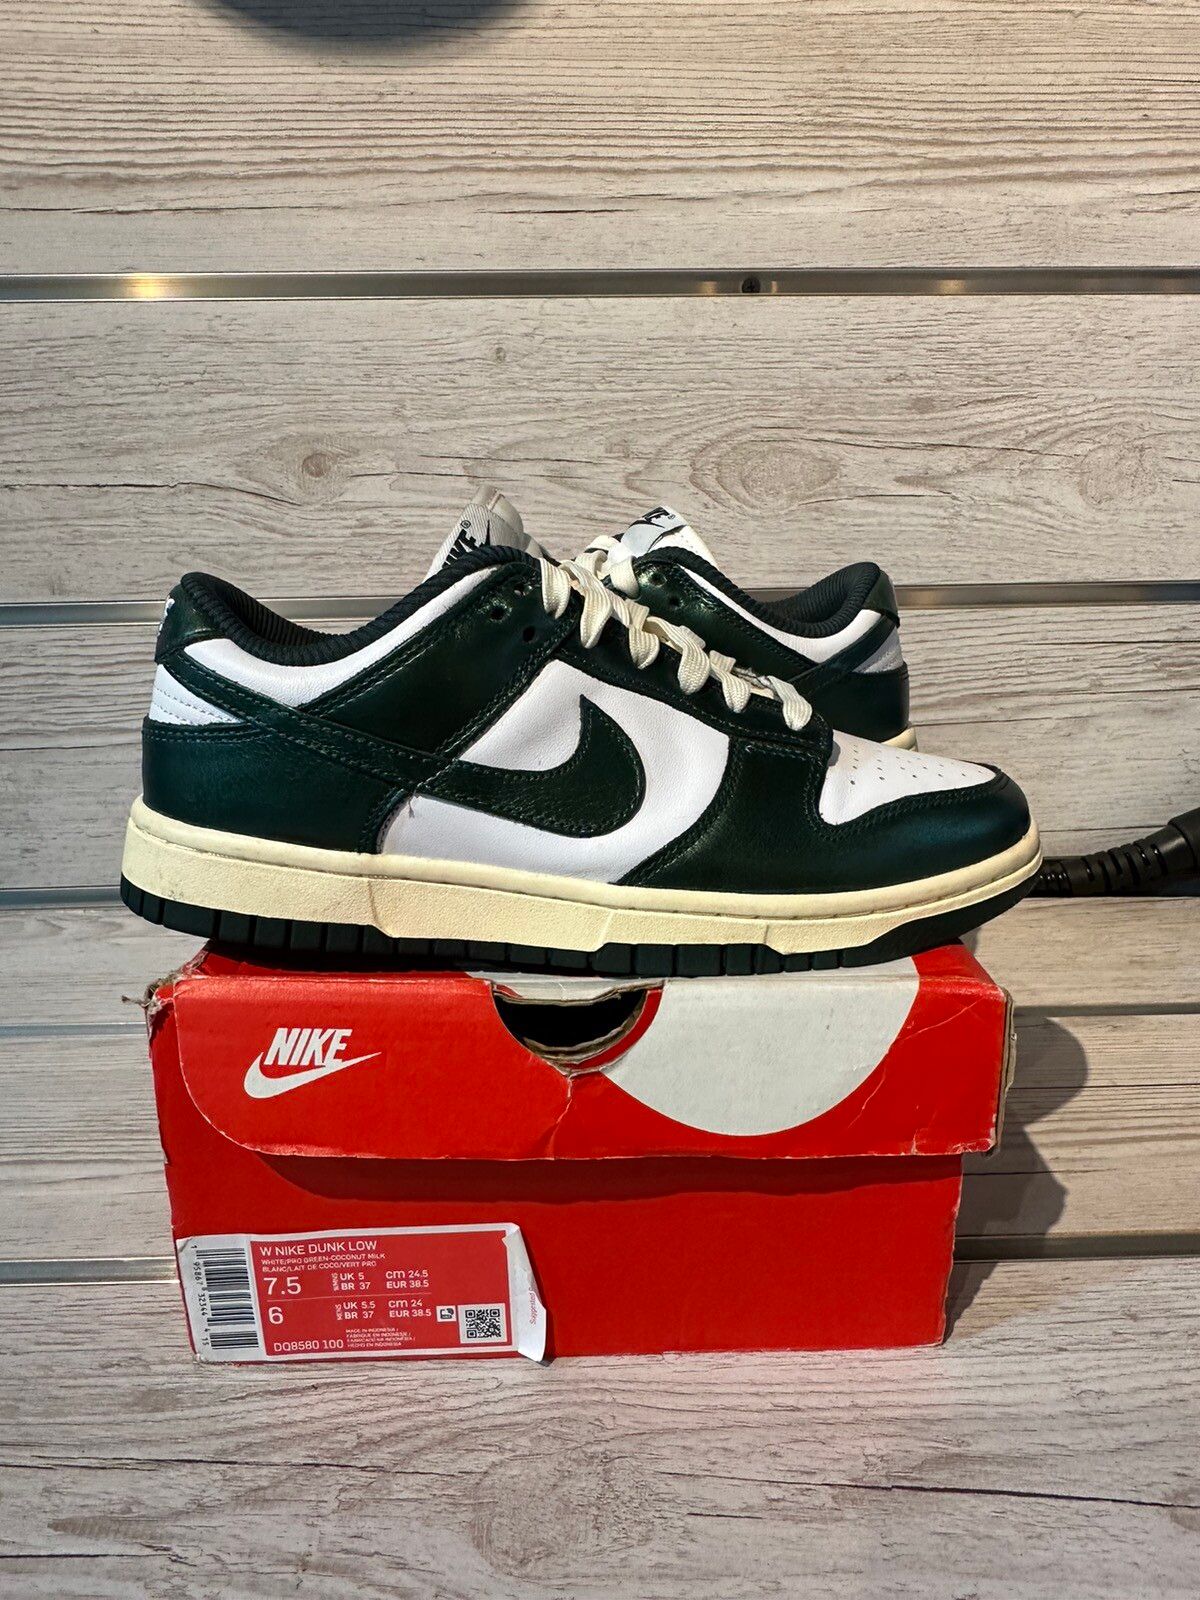 Nike Nike Dunk low Vintage Green Size US 7.5 / IT 37.5 - 2 Preview